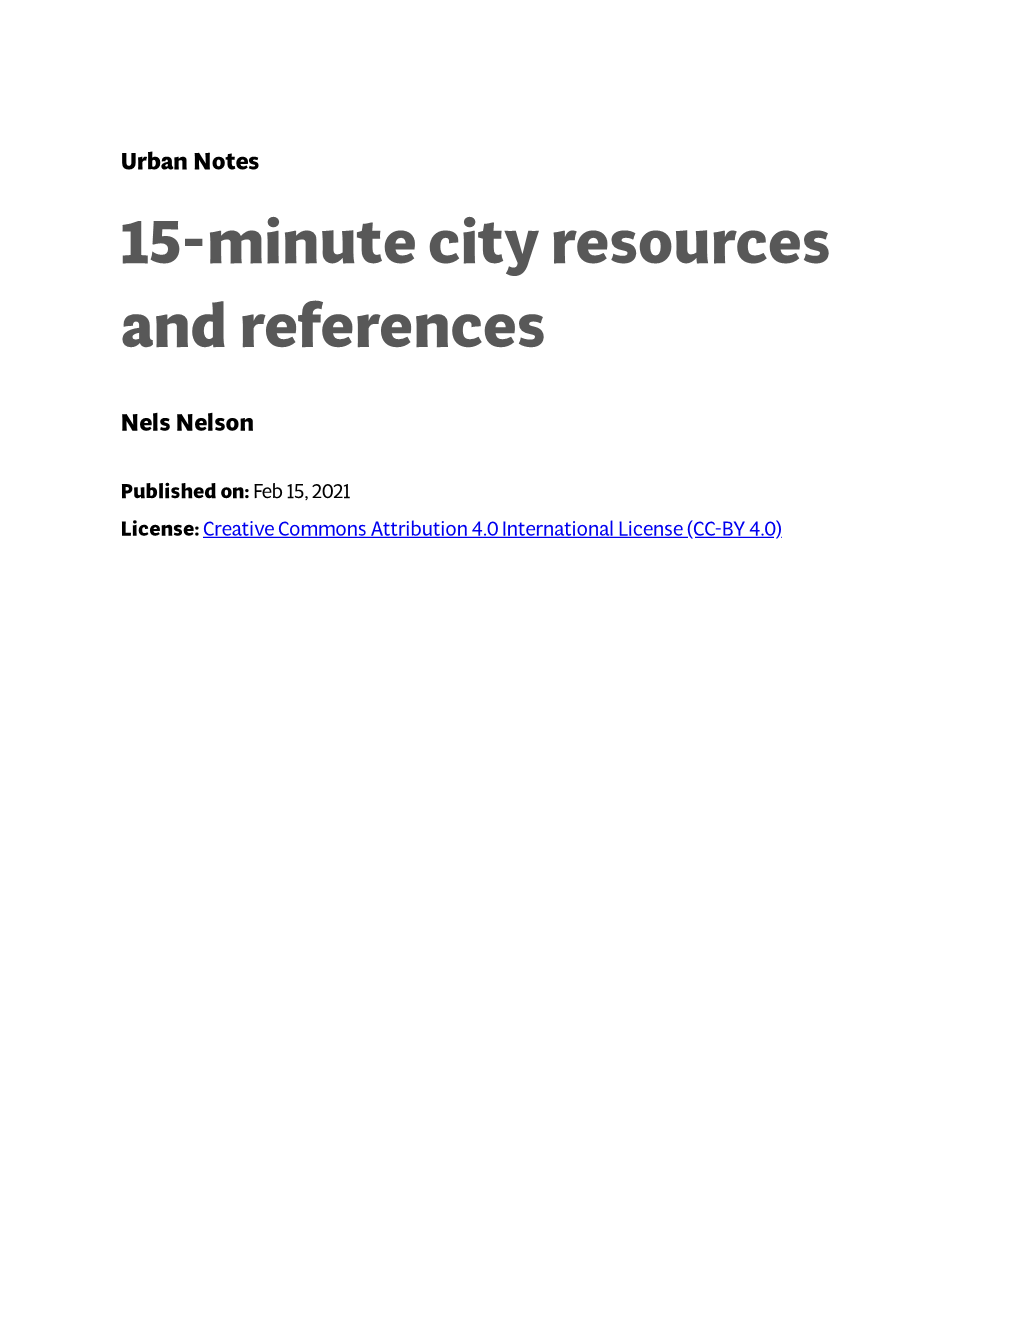 15-Minute City Resources and References